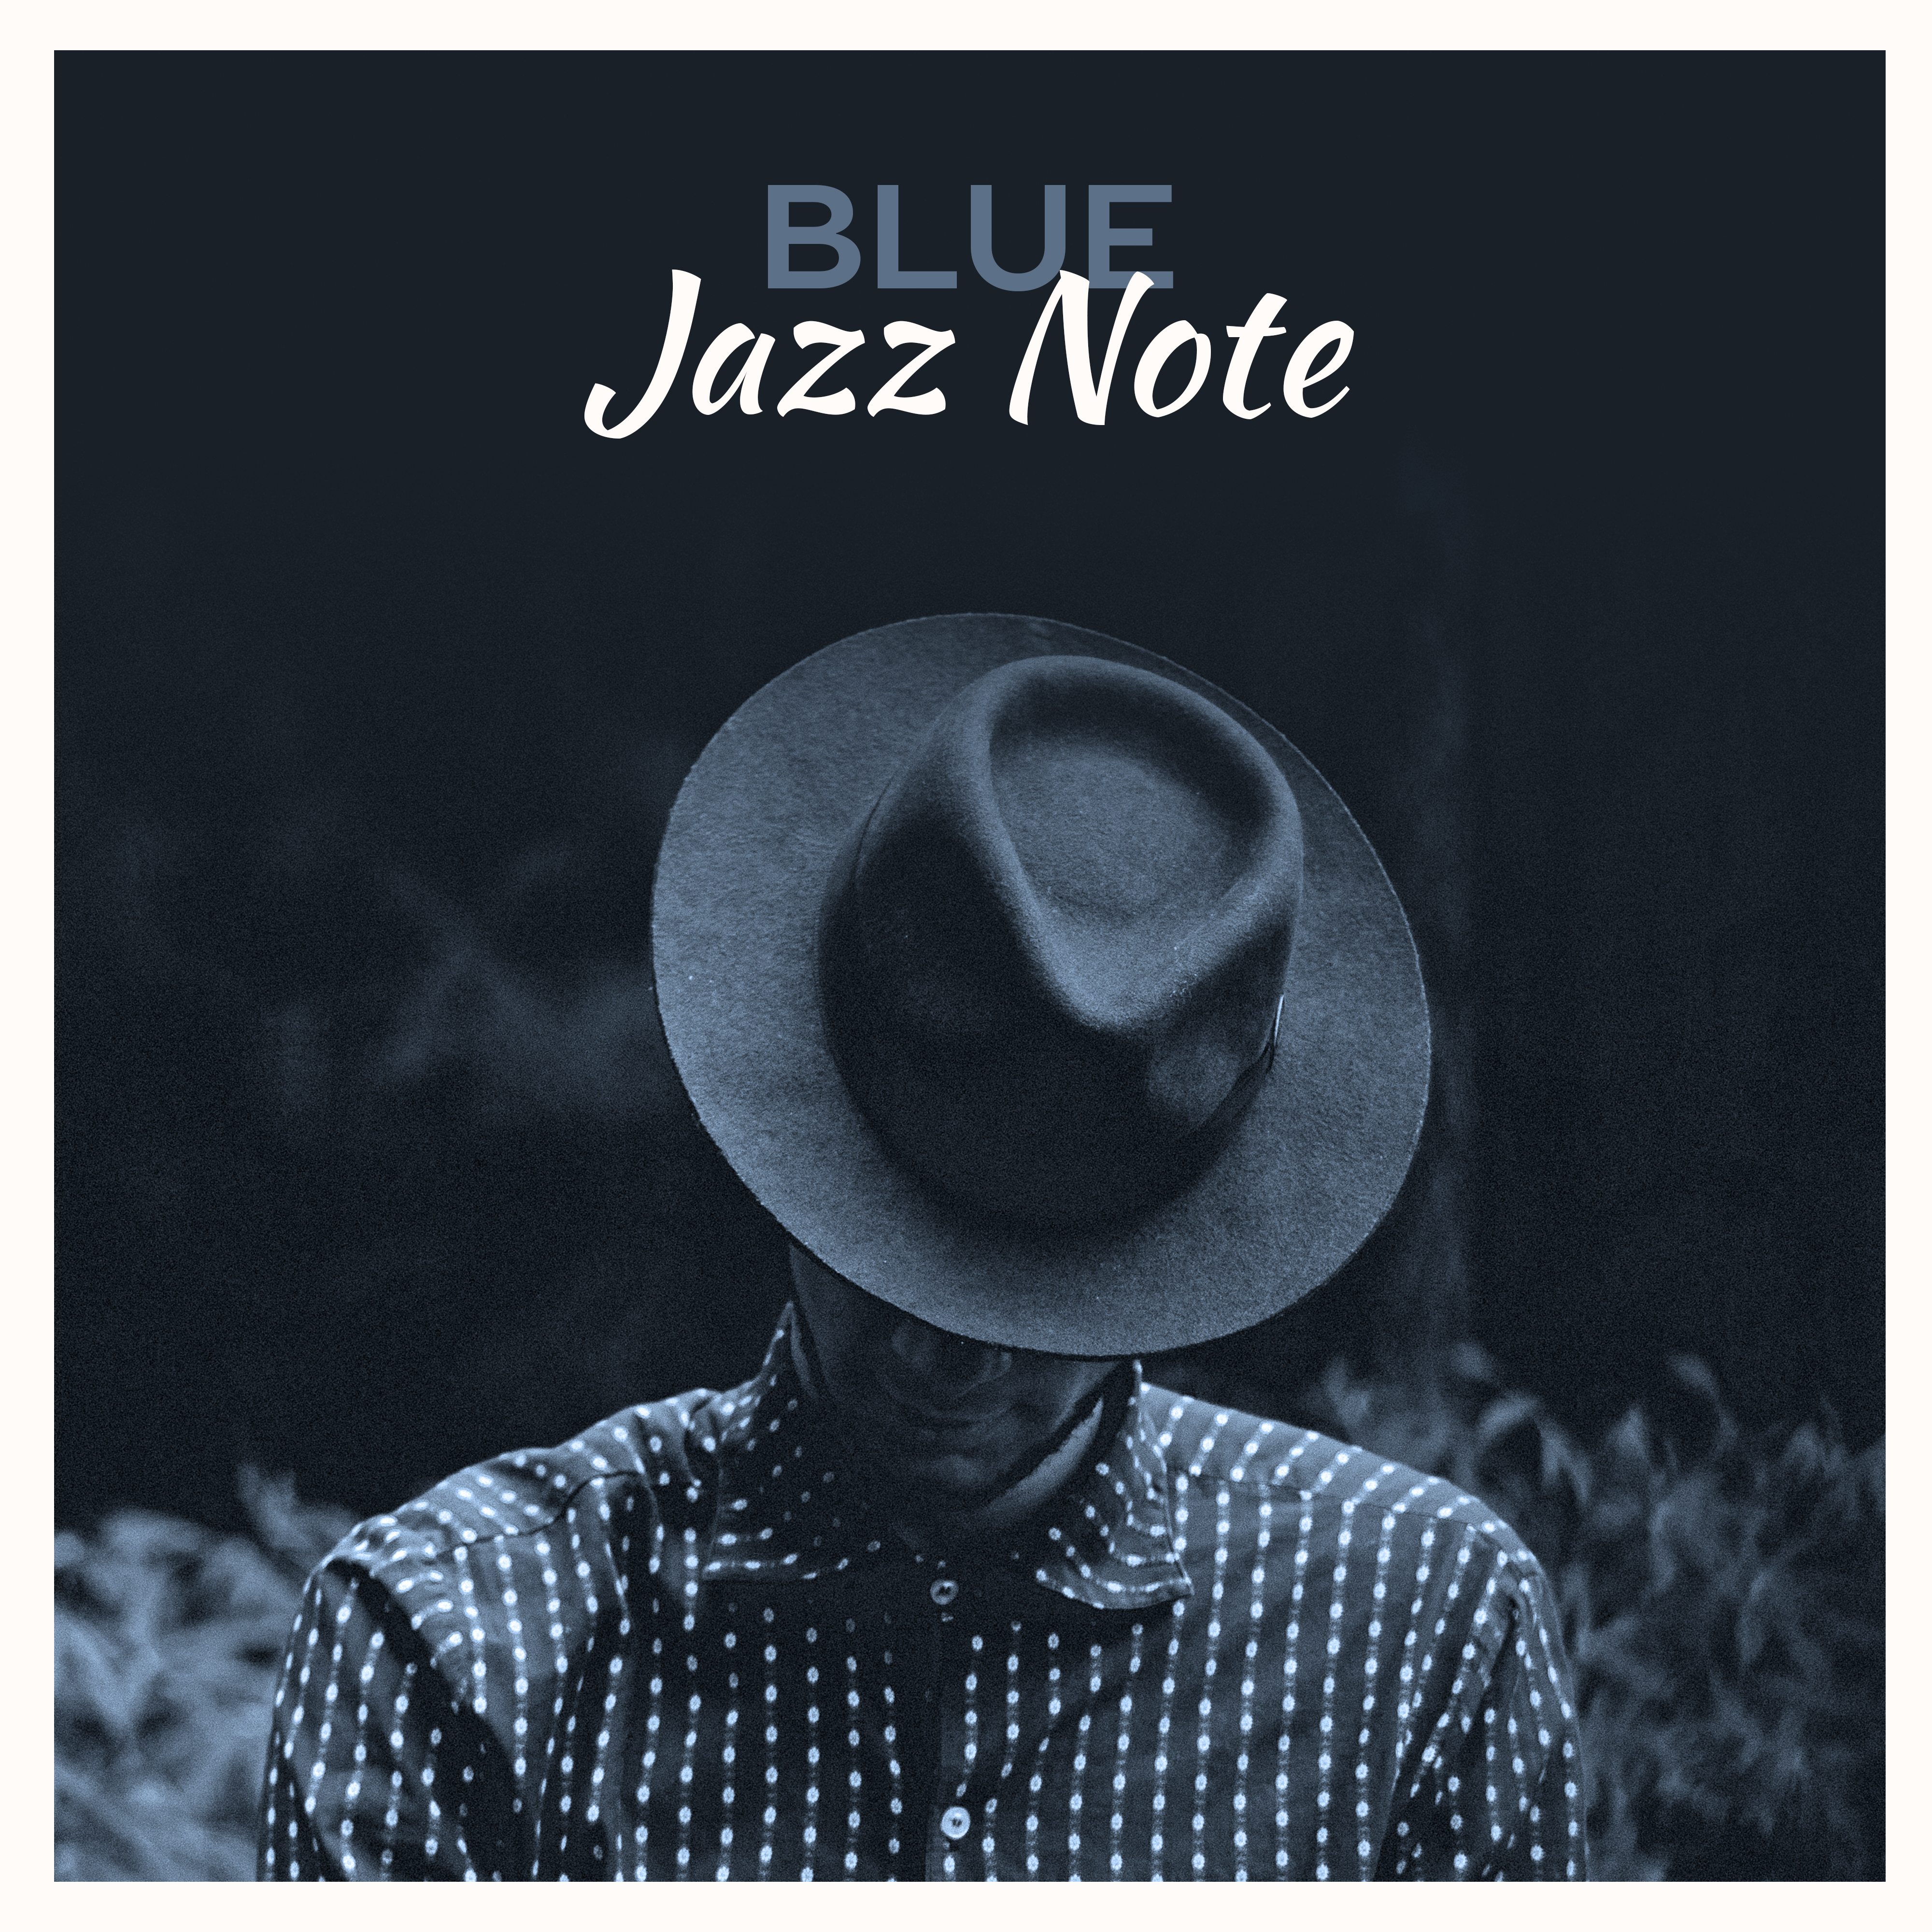 Blue Jazz Note  Chilled Jazz Session, Smooth Jazz, Instrumental Music, Ambient Lounge